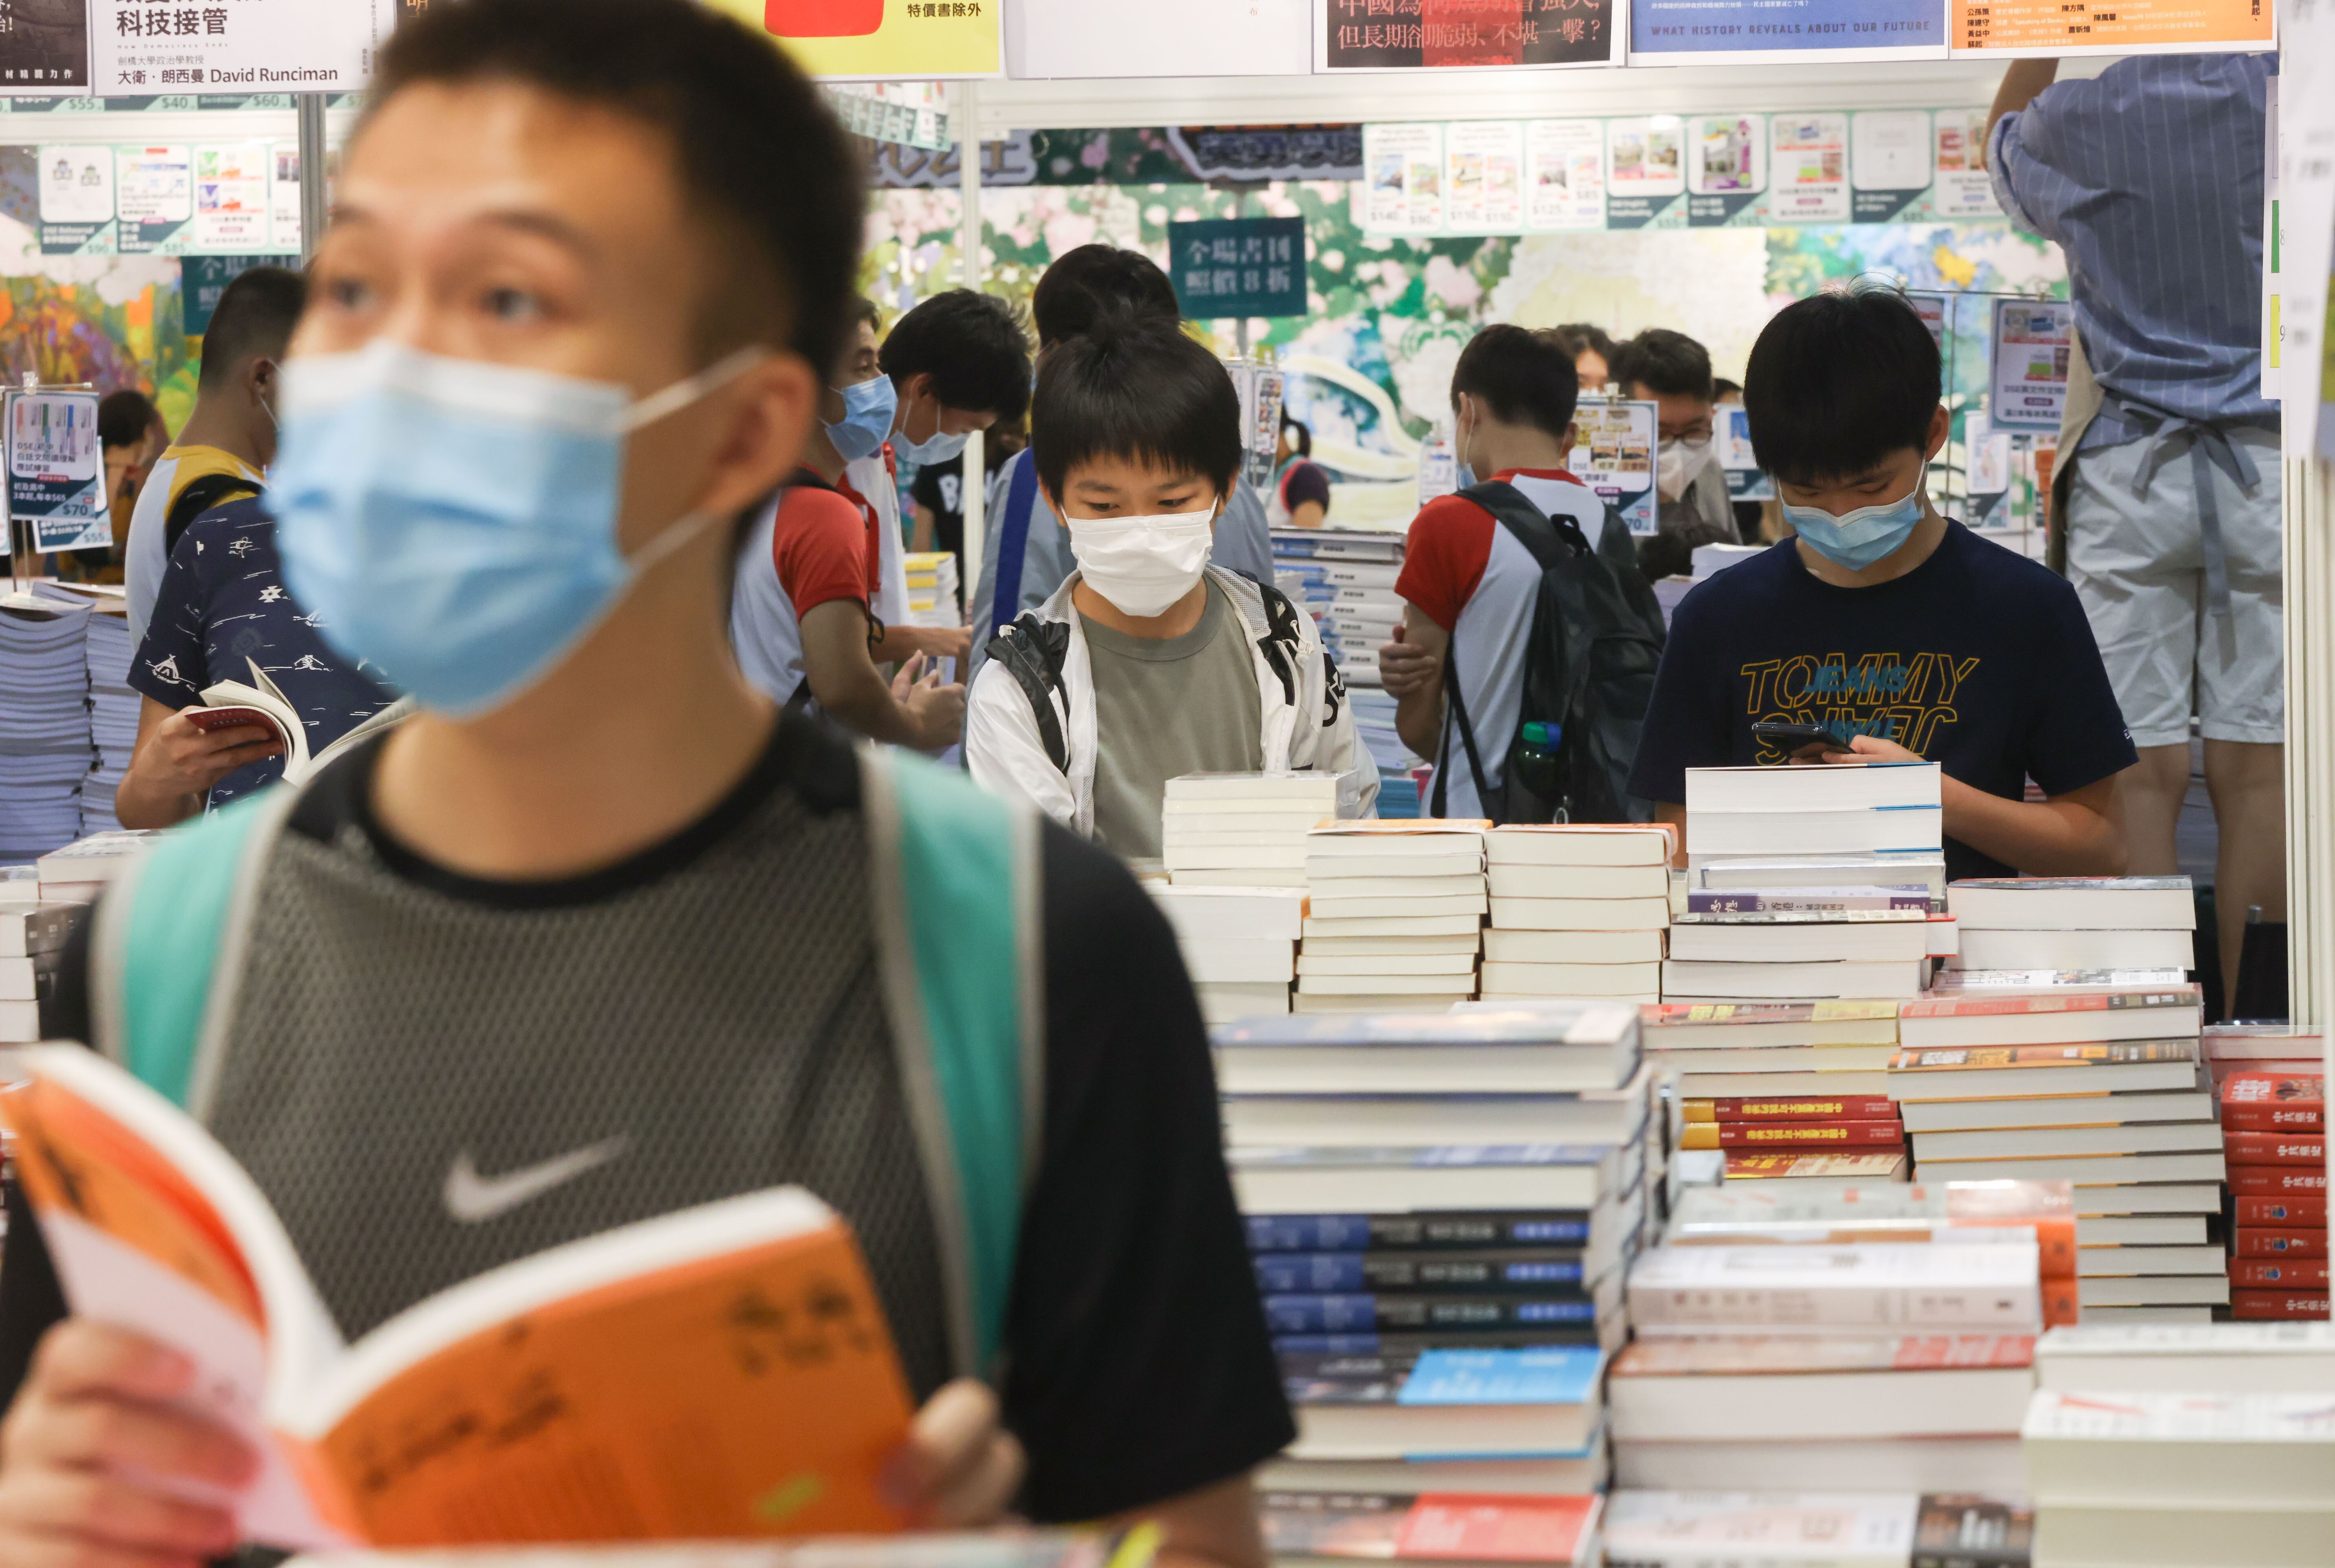 City residents flocked to the long-delayed Hong Kong Book Fair on Wednesday at the Convention and Exhibition Centre in Wan Chai. Photo: K. Y. Cheng